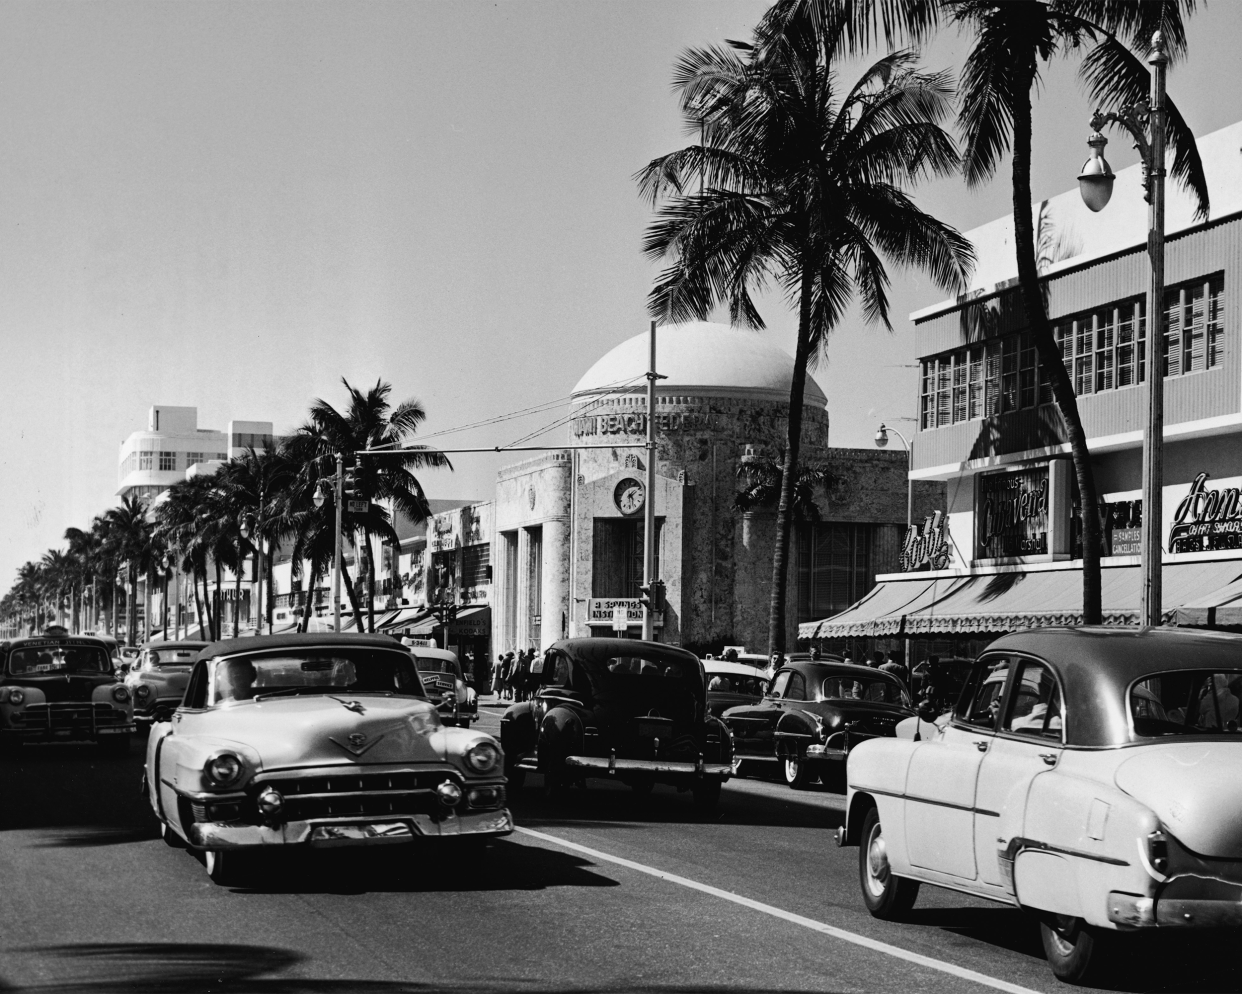 View of the traffic at the intersection of Lincoln Road & Washington Avenue, Miami Beach, Florida, February 9, 1954.